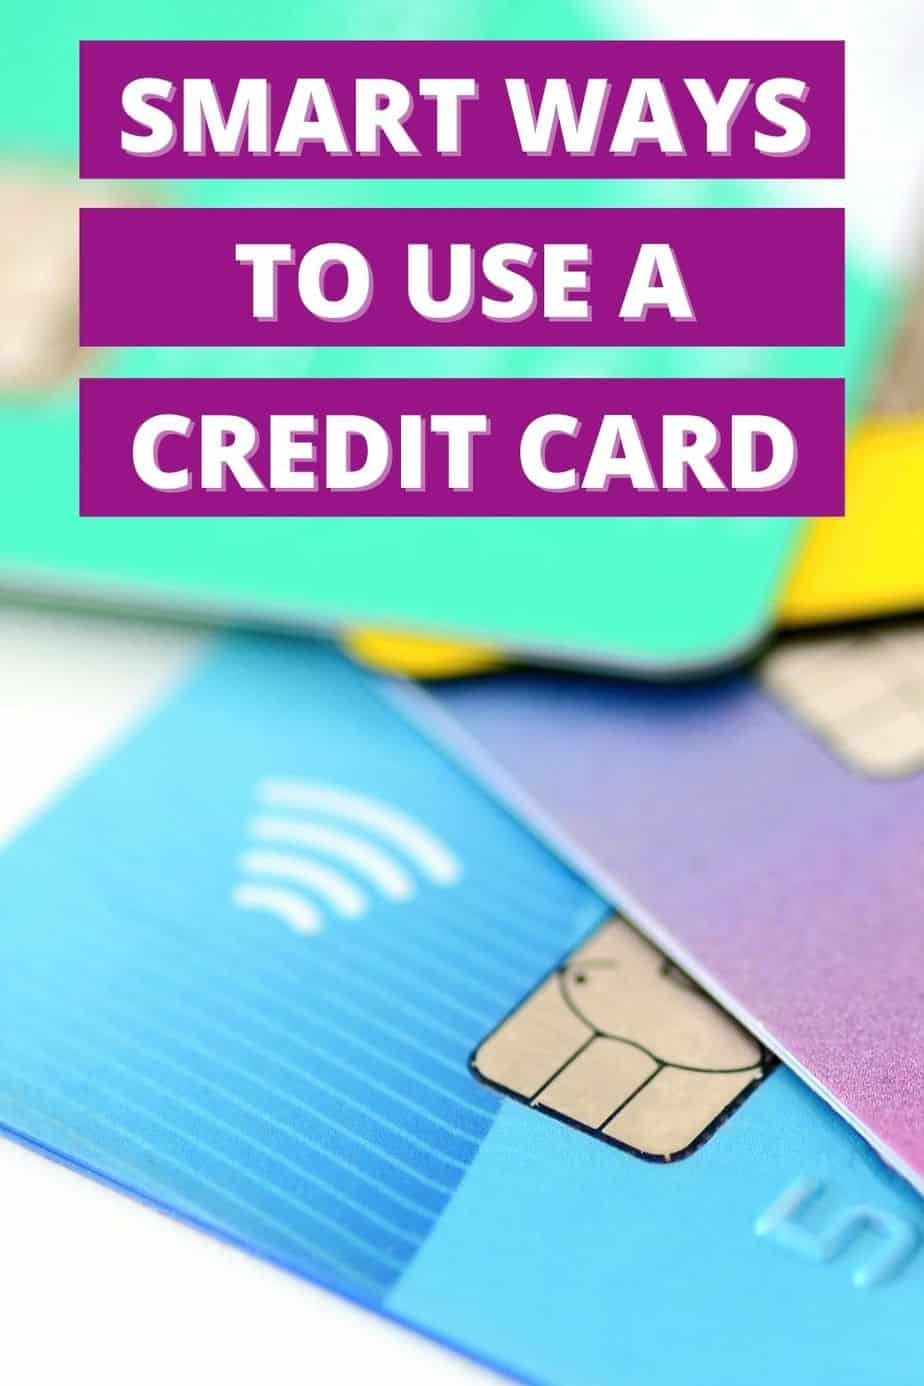 Smart ways to use a credit card